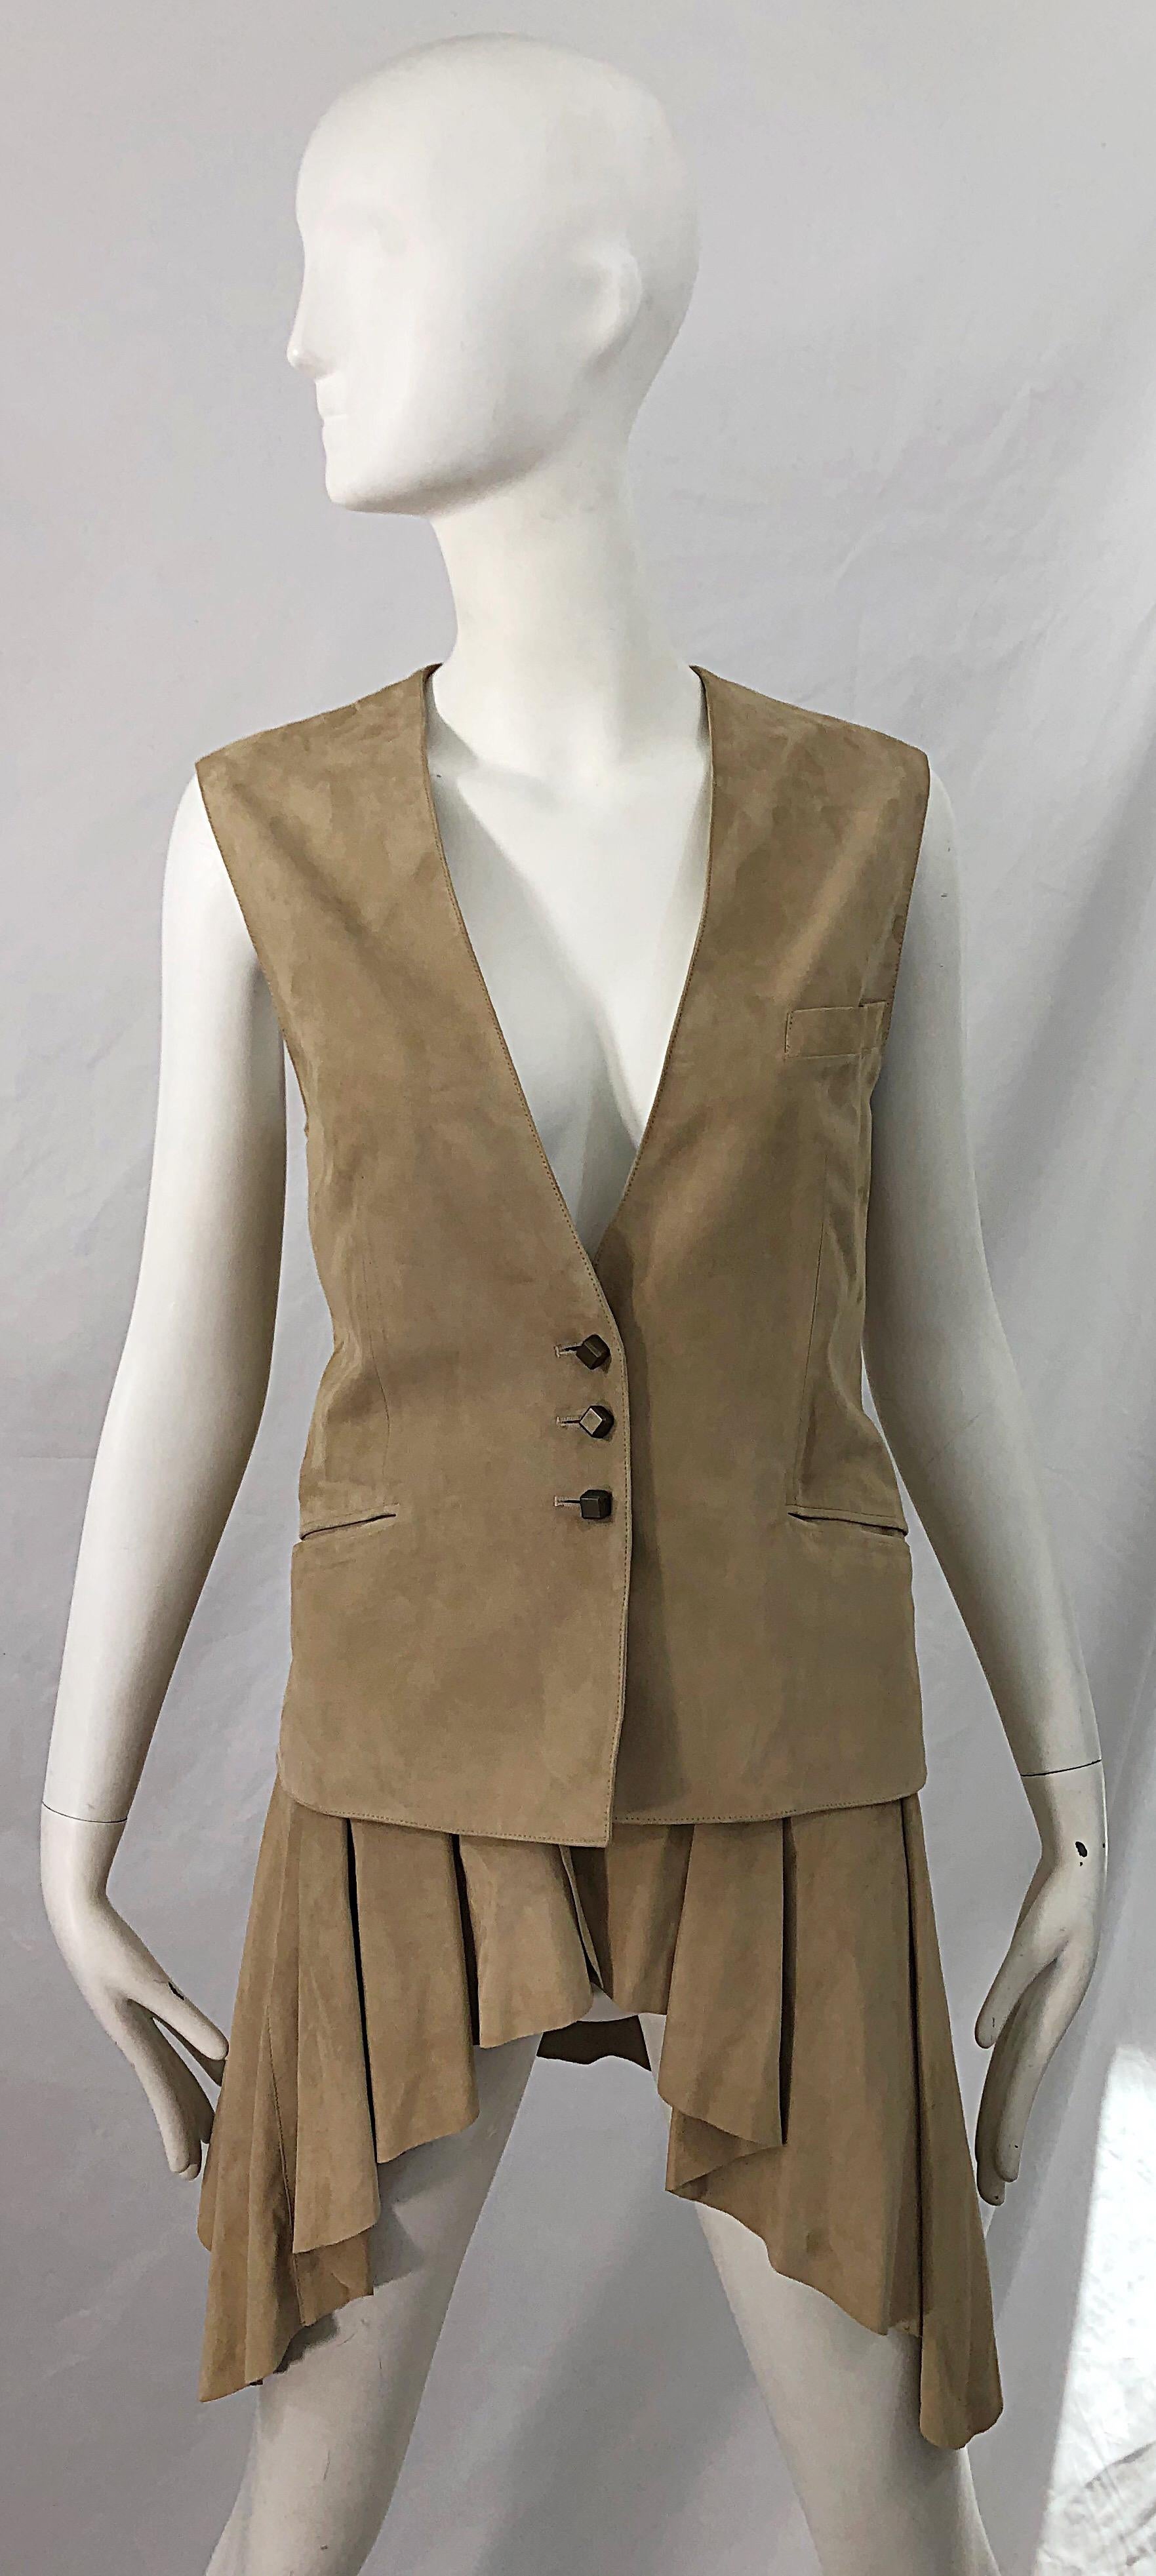 Stylish late 90s EMANUEL UNGARO tan suede leather sleeveless dip hem vest jacket ! Features the softest most luxurious suede. Three square brass buttons up the front. Pockets at each side of the waist and at left breast. Fully lined. Can easily be